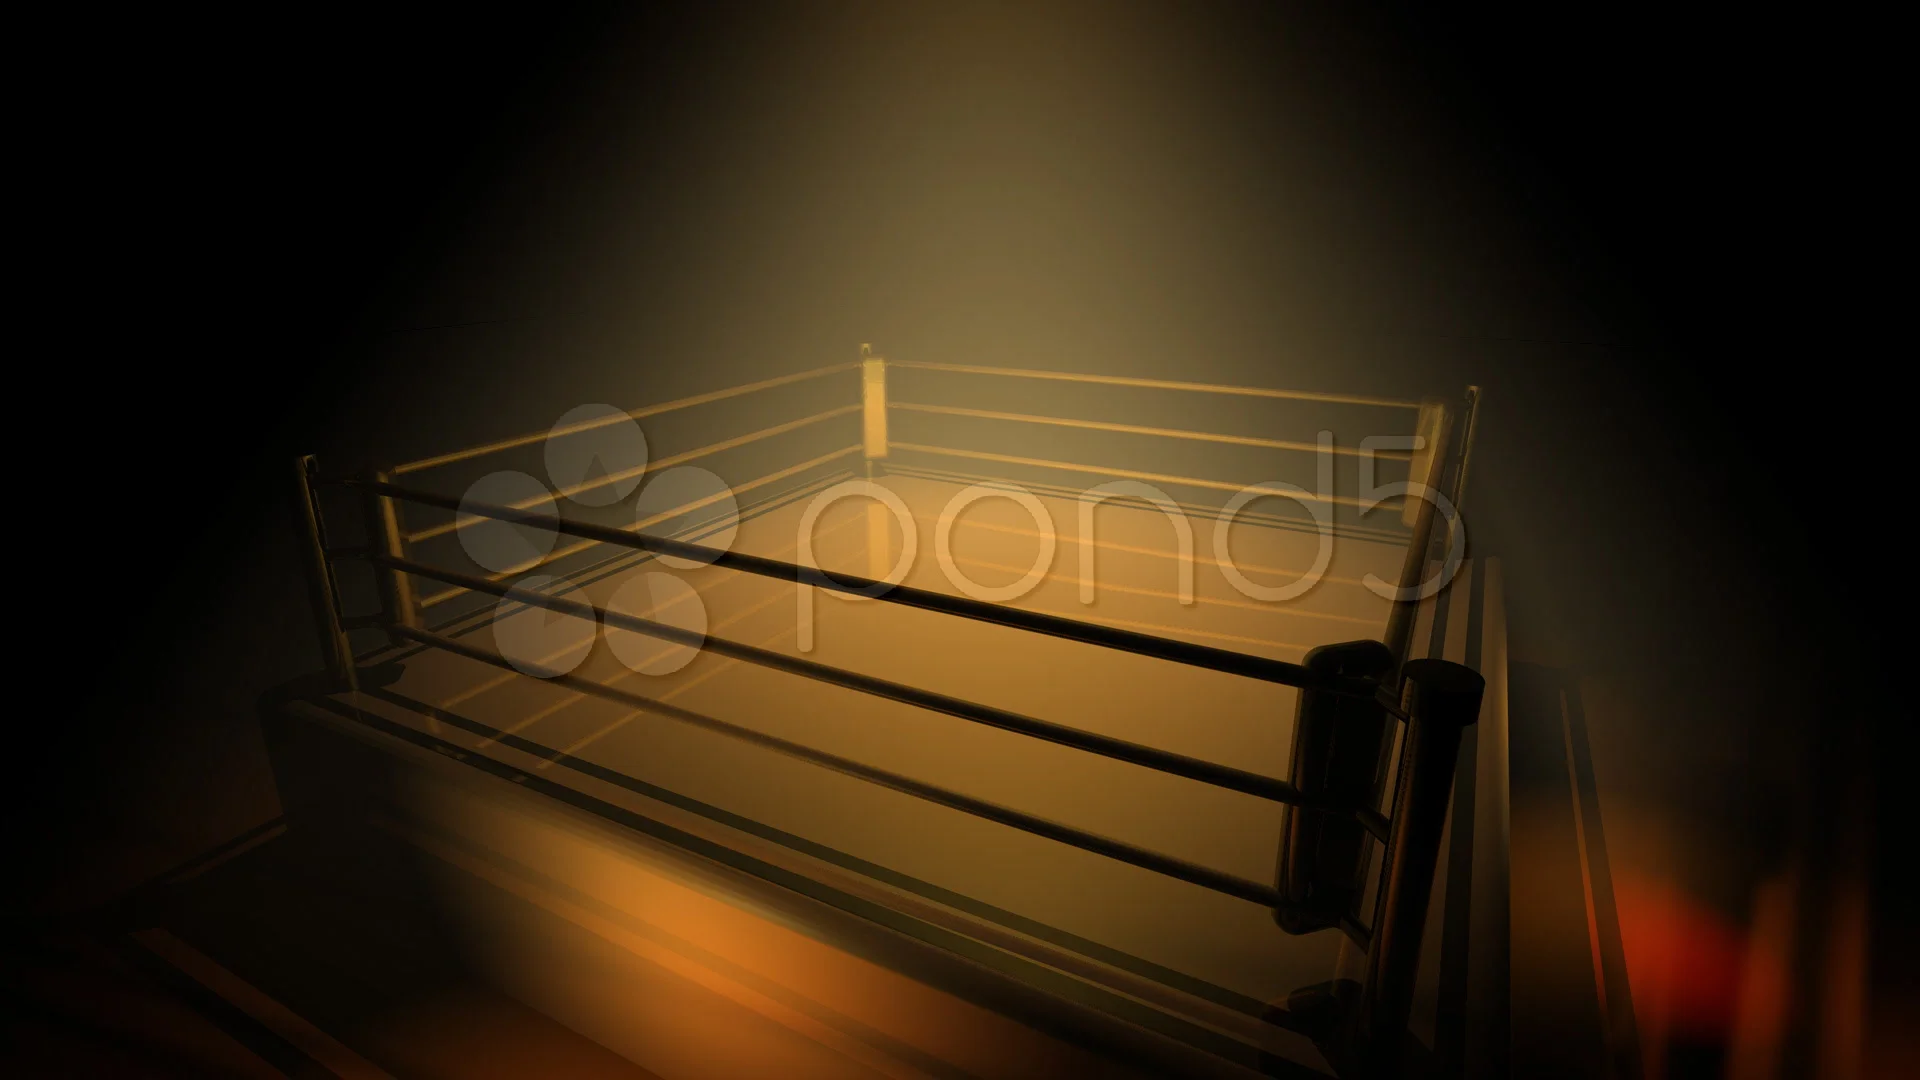 Rotating Boxing Ring | Stock Video | Pond5